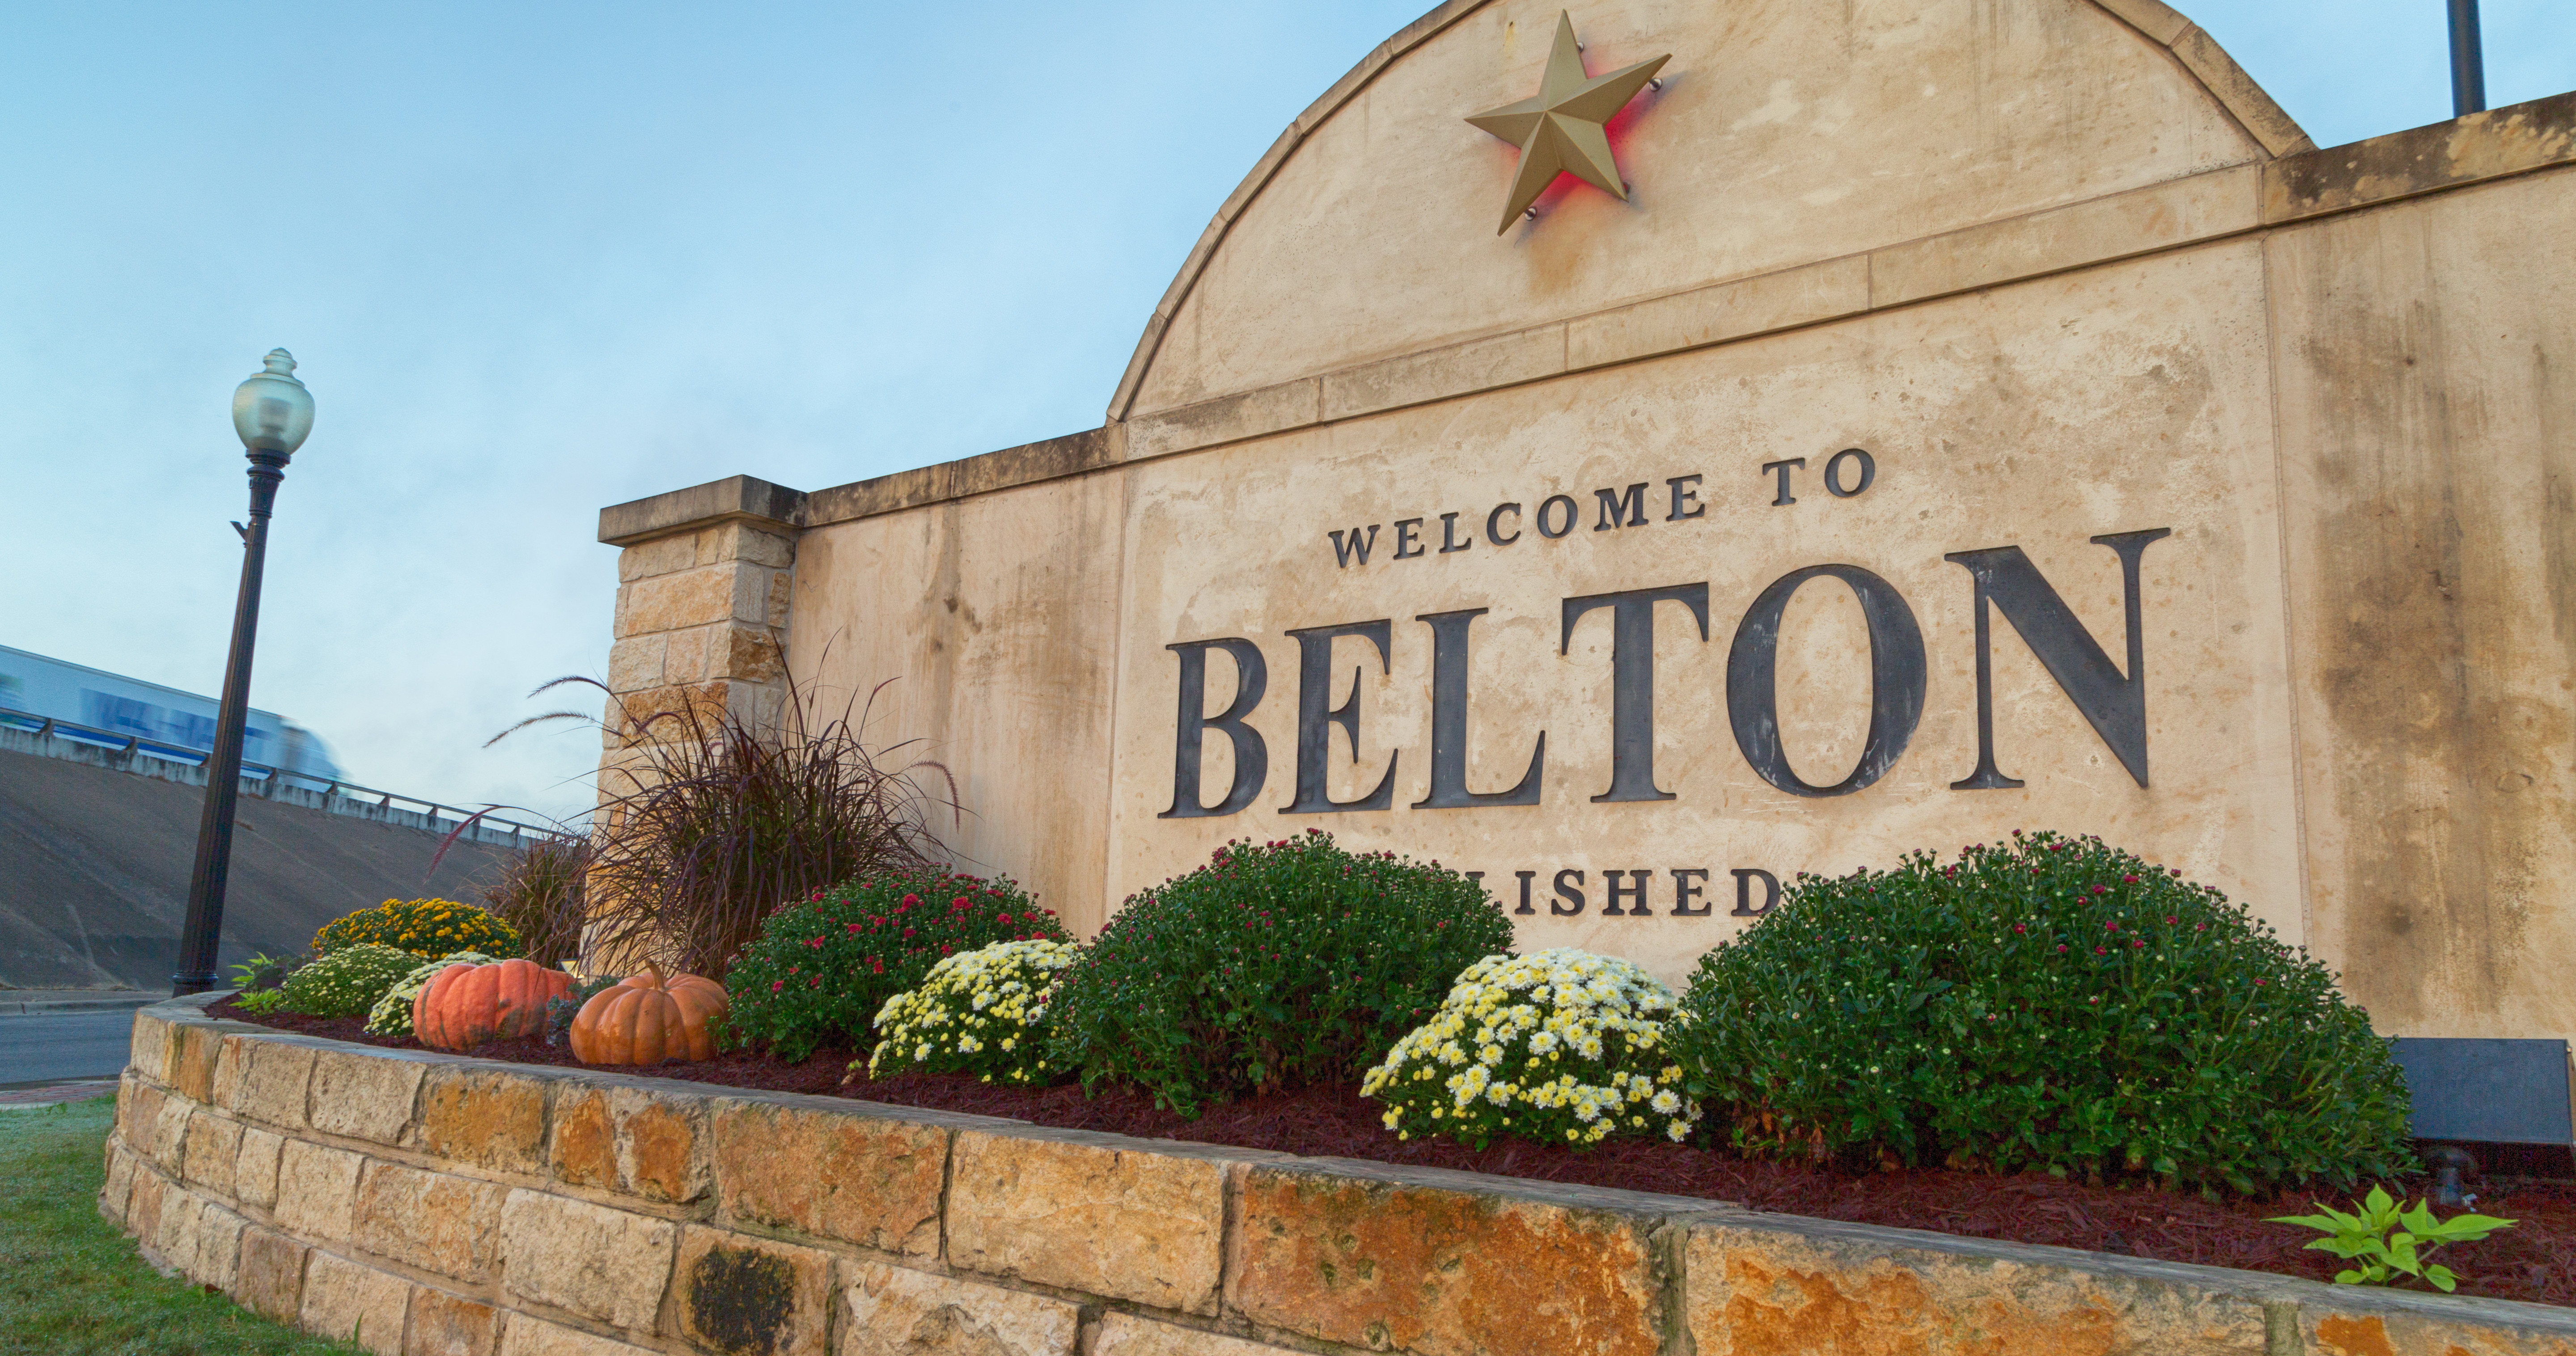 The City of Belton stone sign